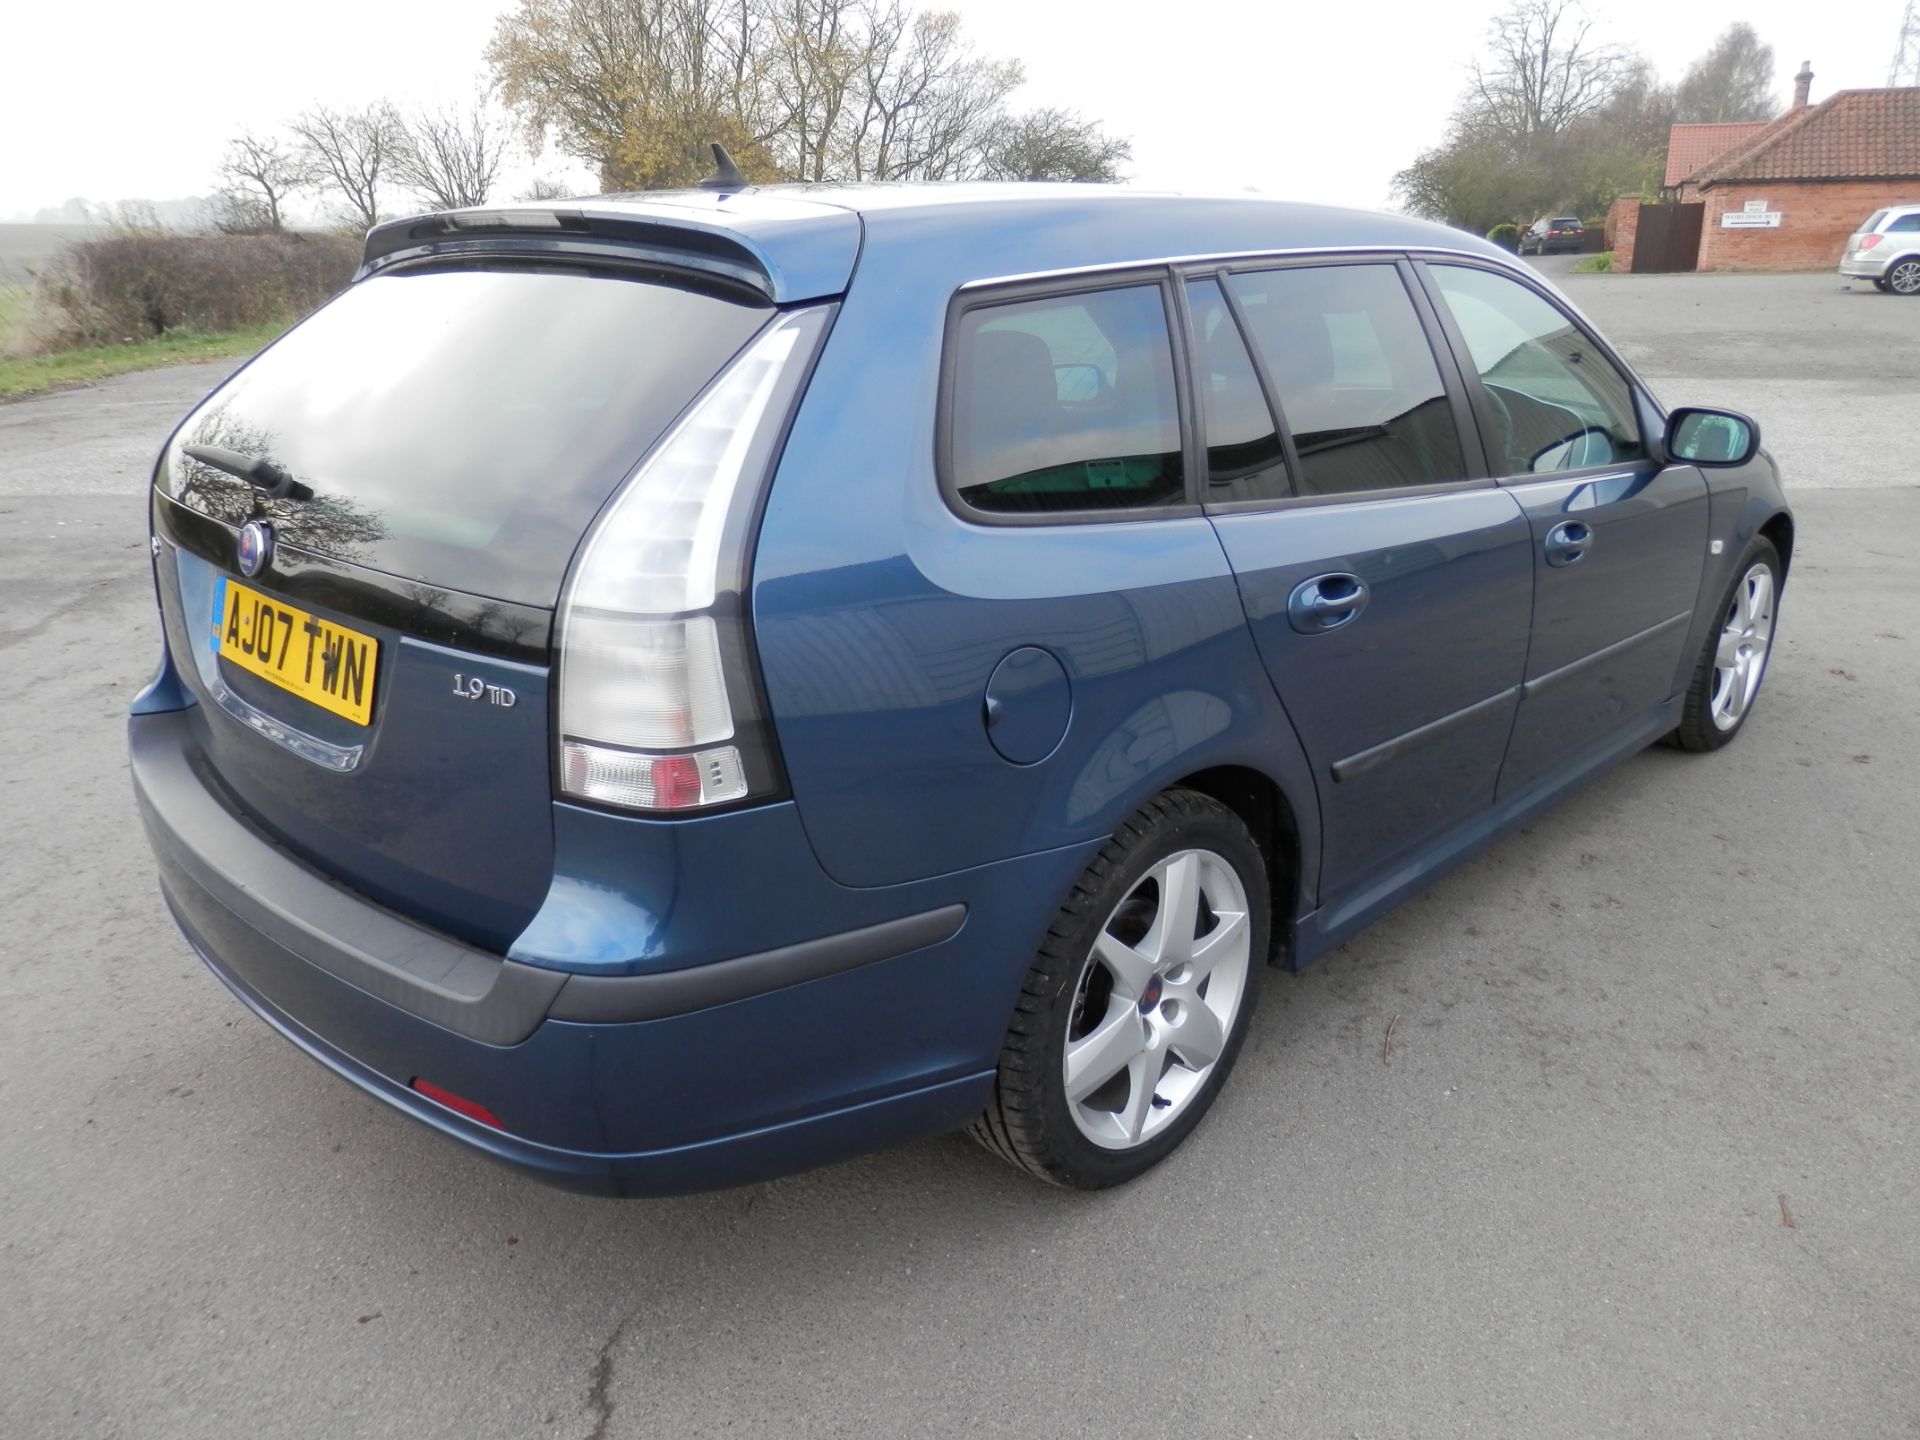 NOW WITH NO RESERVE !! 2007/07 SAAB 93 SPORTWAGON 1.9 TID 120 BHP, 6 SPEED MANUAL, MOT MARCH 2007. - Image 11 of 25